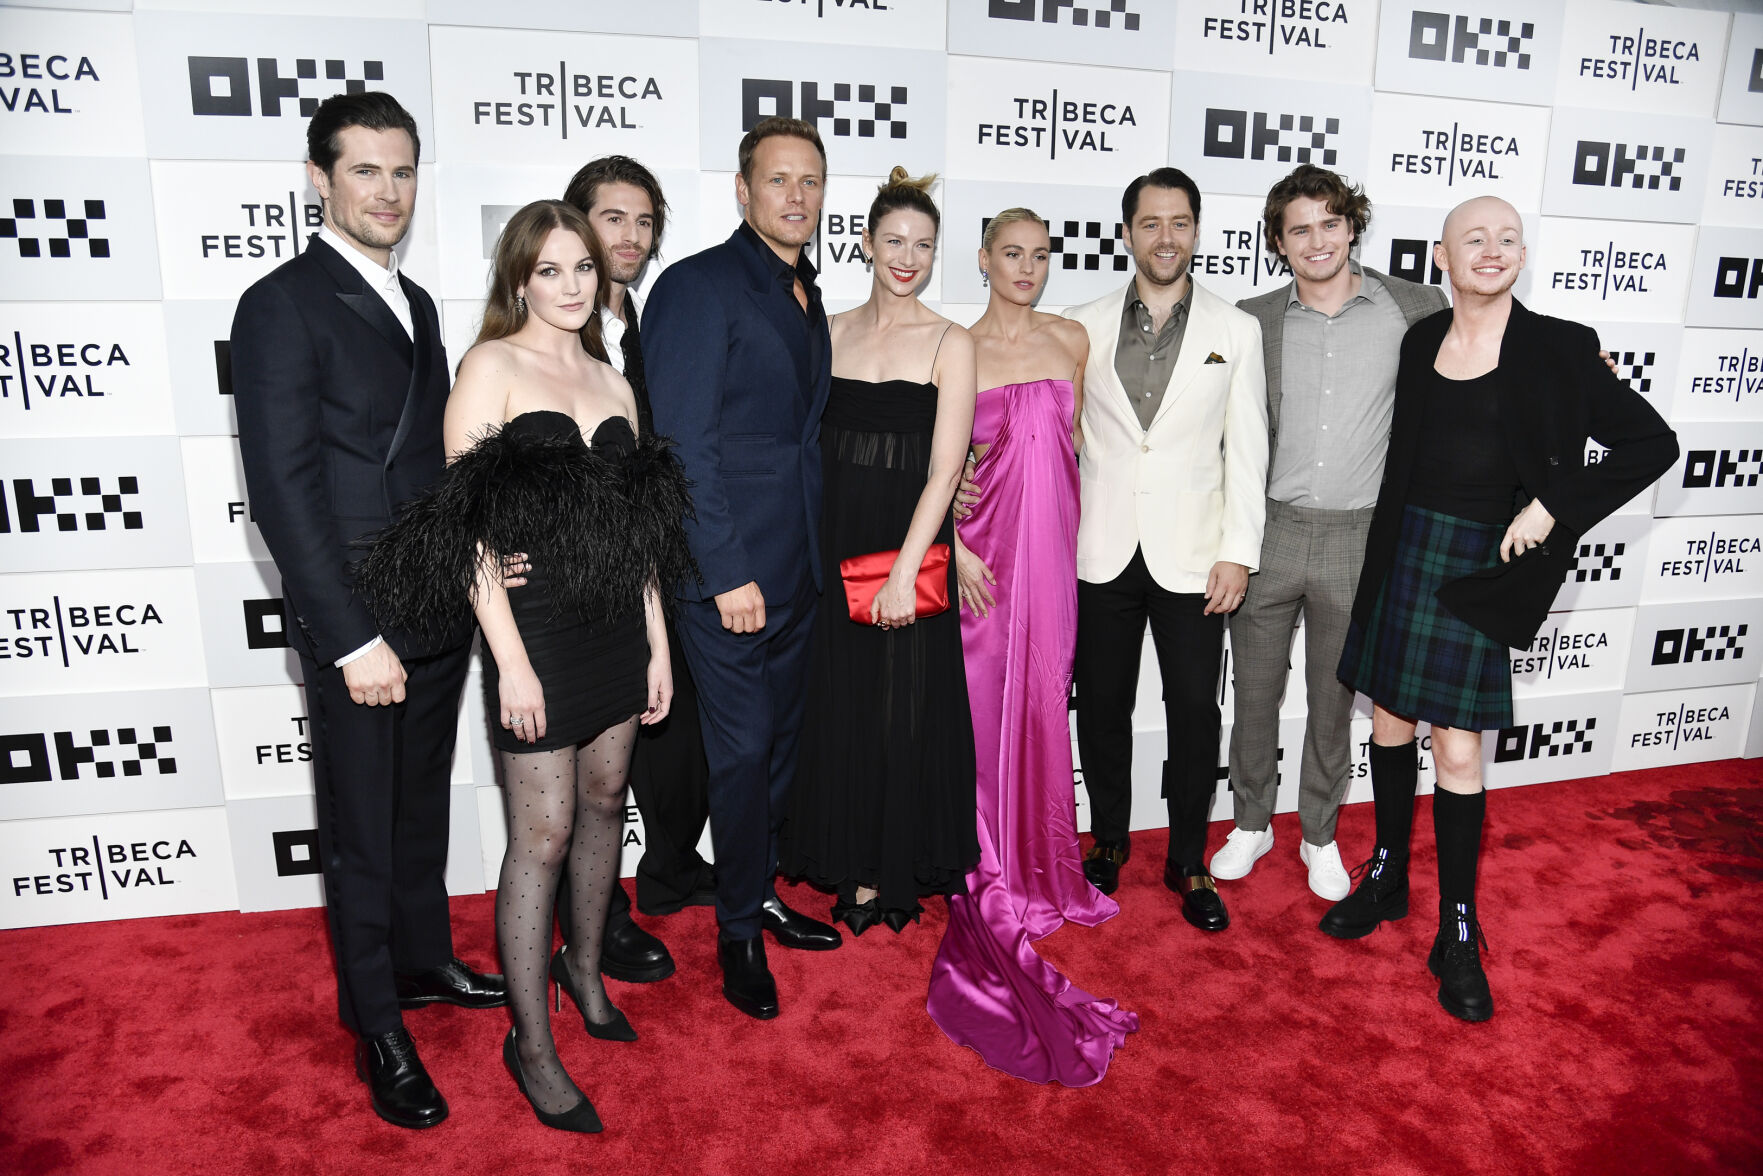 Actors David Berry, left, Izzy Meikle-Small, Joey Phillips, Sam Heughan, Caitriona Balfe, Sophie Skelton, Richard Rankin, Charles Vandervaart and John Bell pose together at the premiere of "Outlander" season 7 during the Tribeca Festival at the OKX Theater BMCC Tribeca Performing Arts Center on Friday, June 9, 2023, in New York.